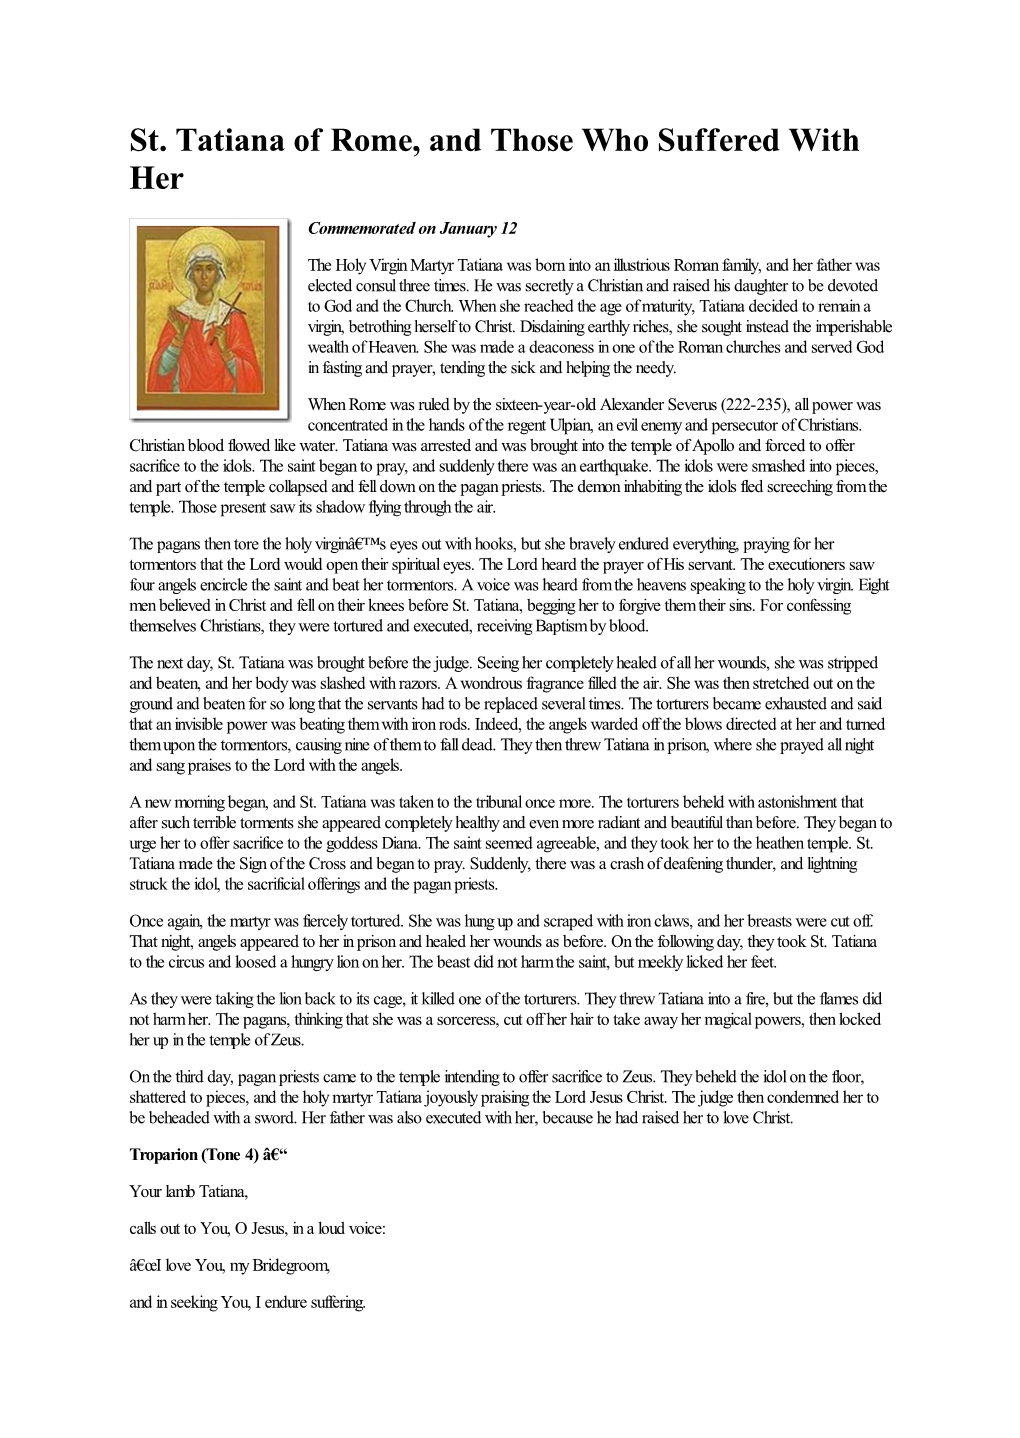 St. Tatiana of Rome, and Those Who Suffered with Her